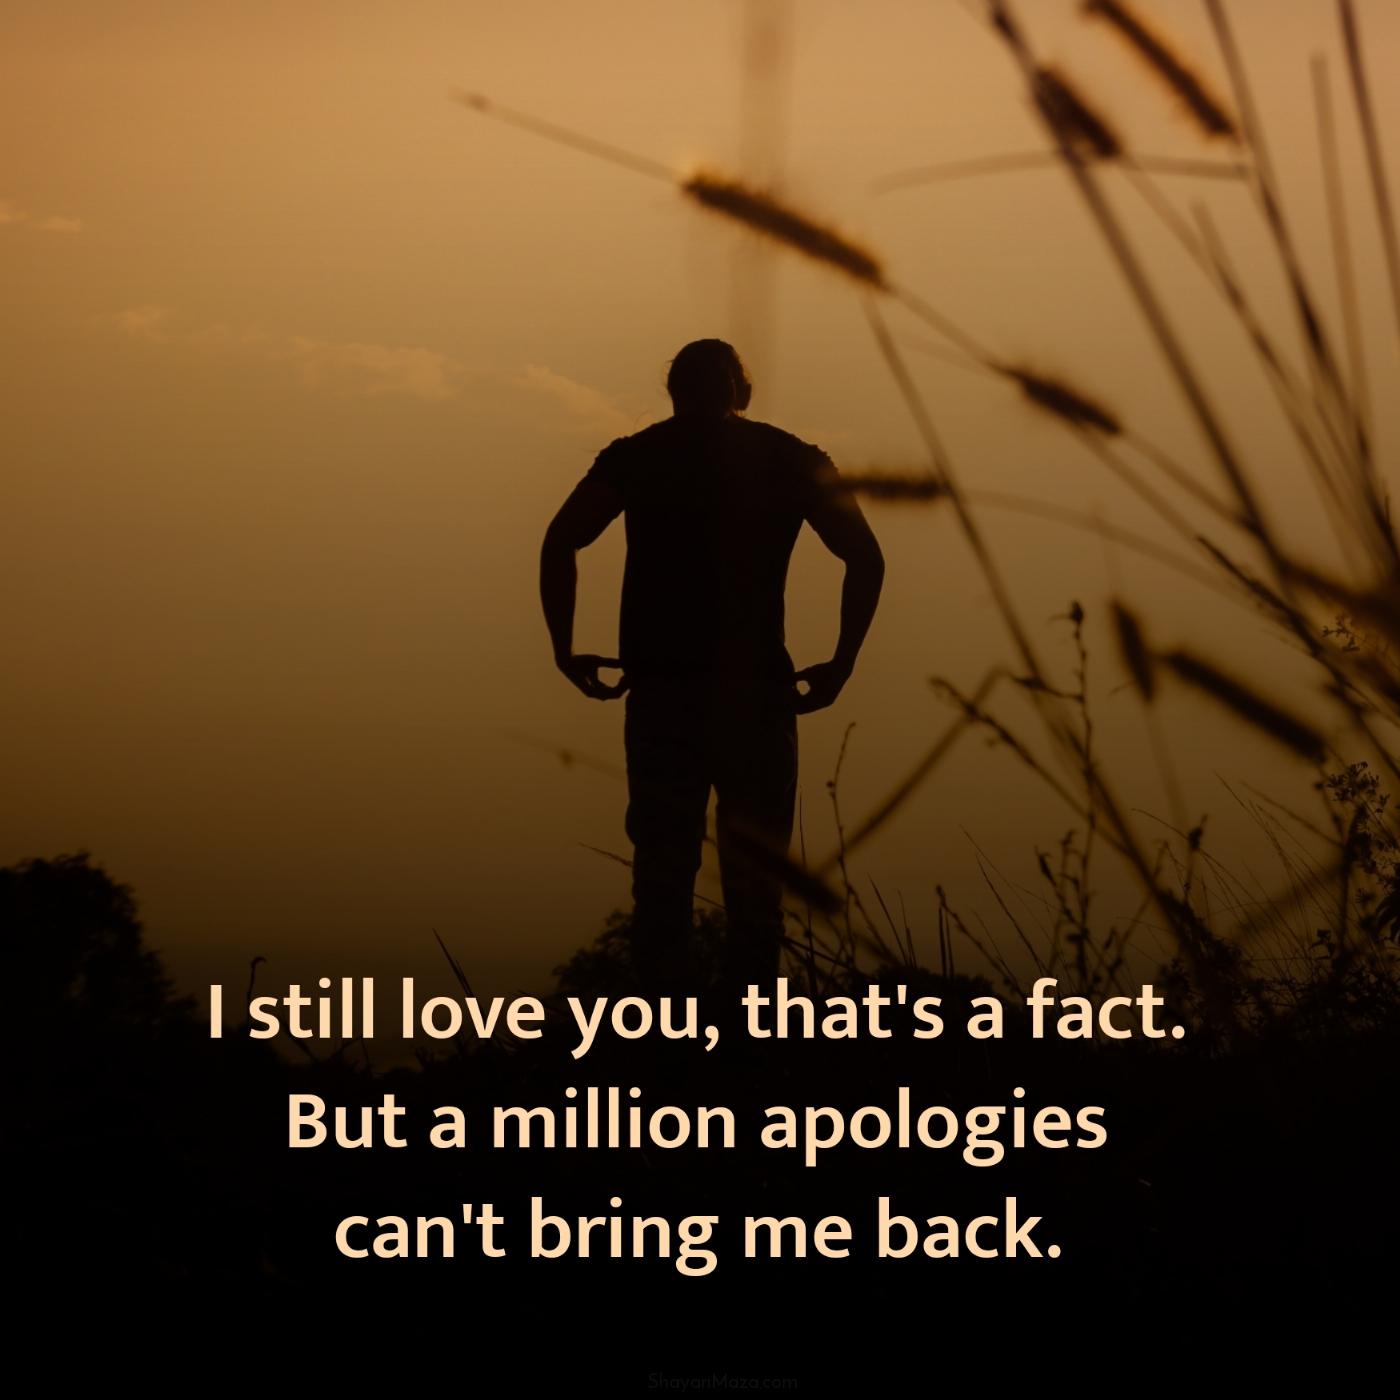 I still love you that's a fact But a million apologies